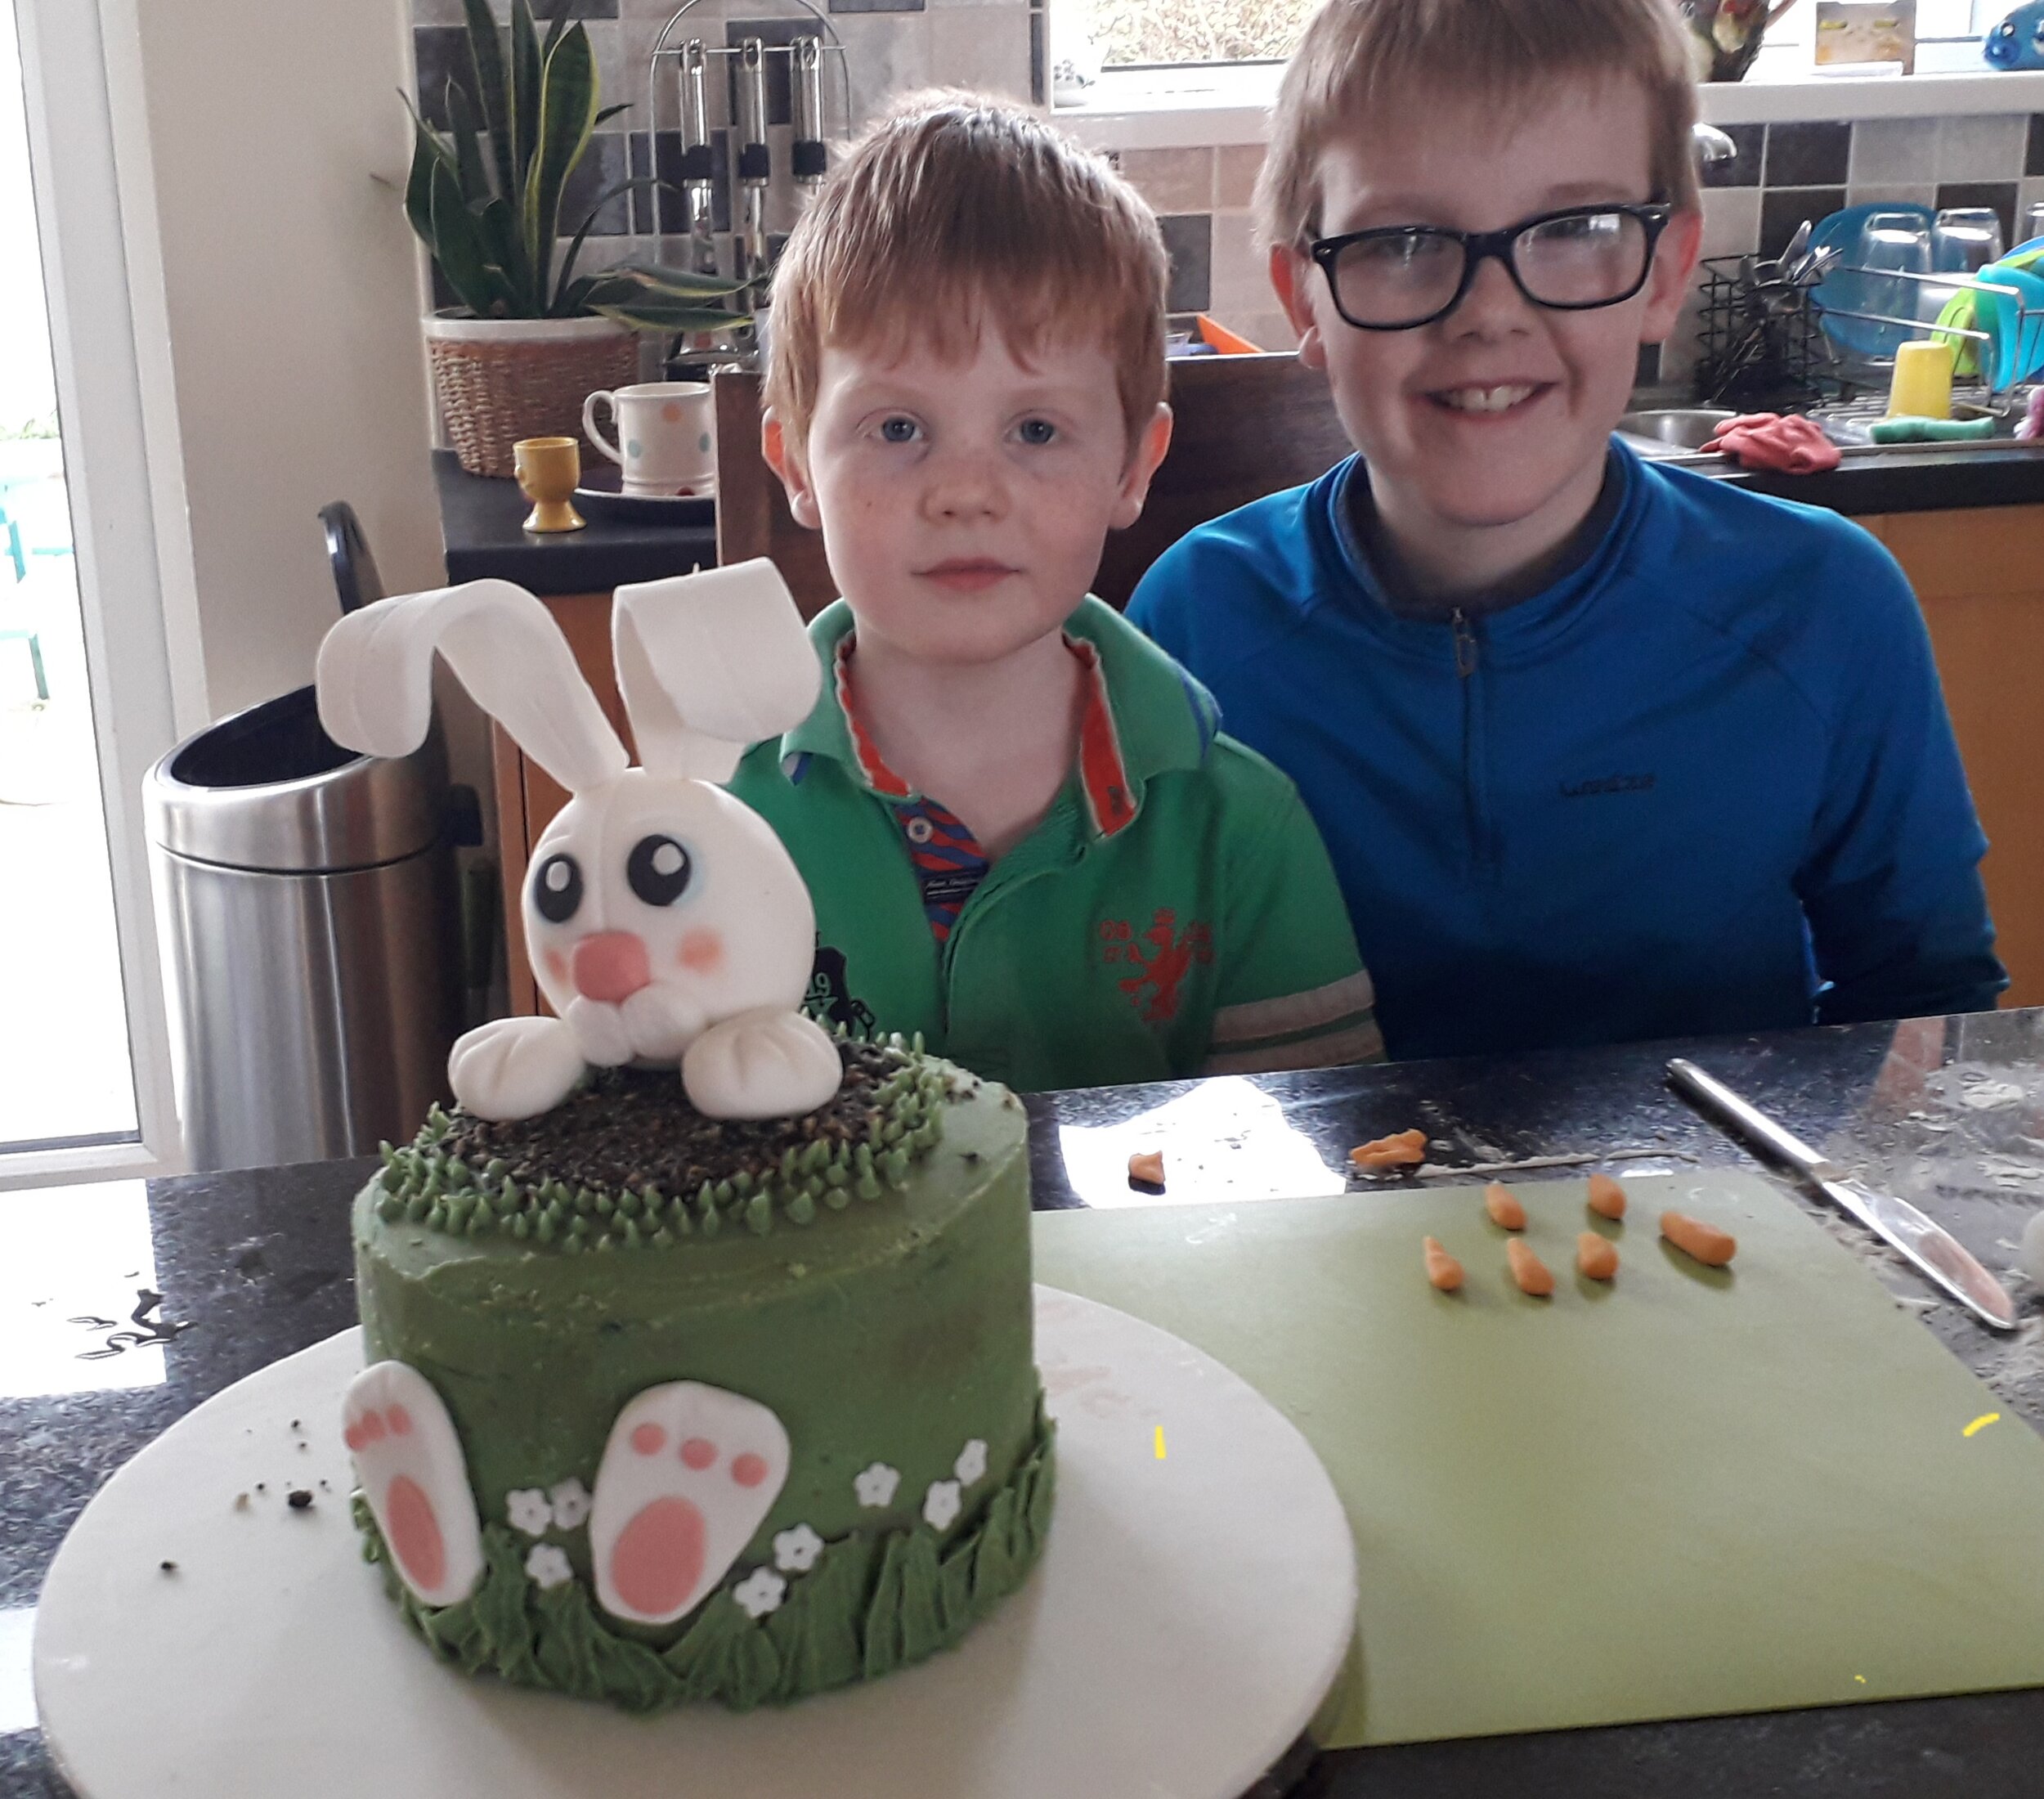 Dan &amp; Harry helping to make fondant carrots for the Easter bunny cake!